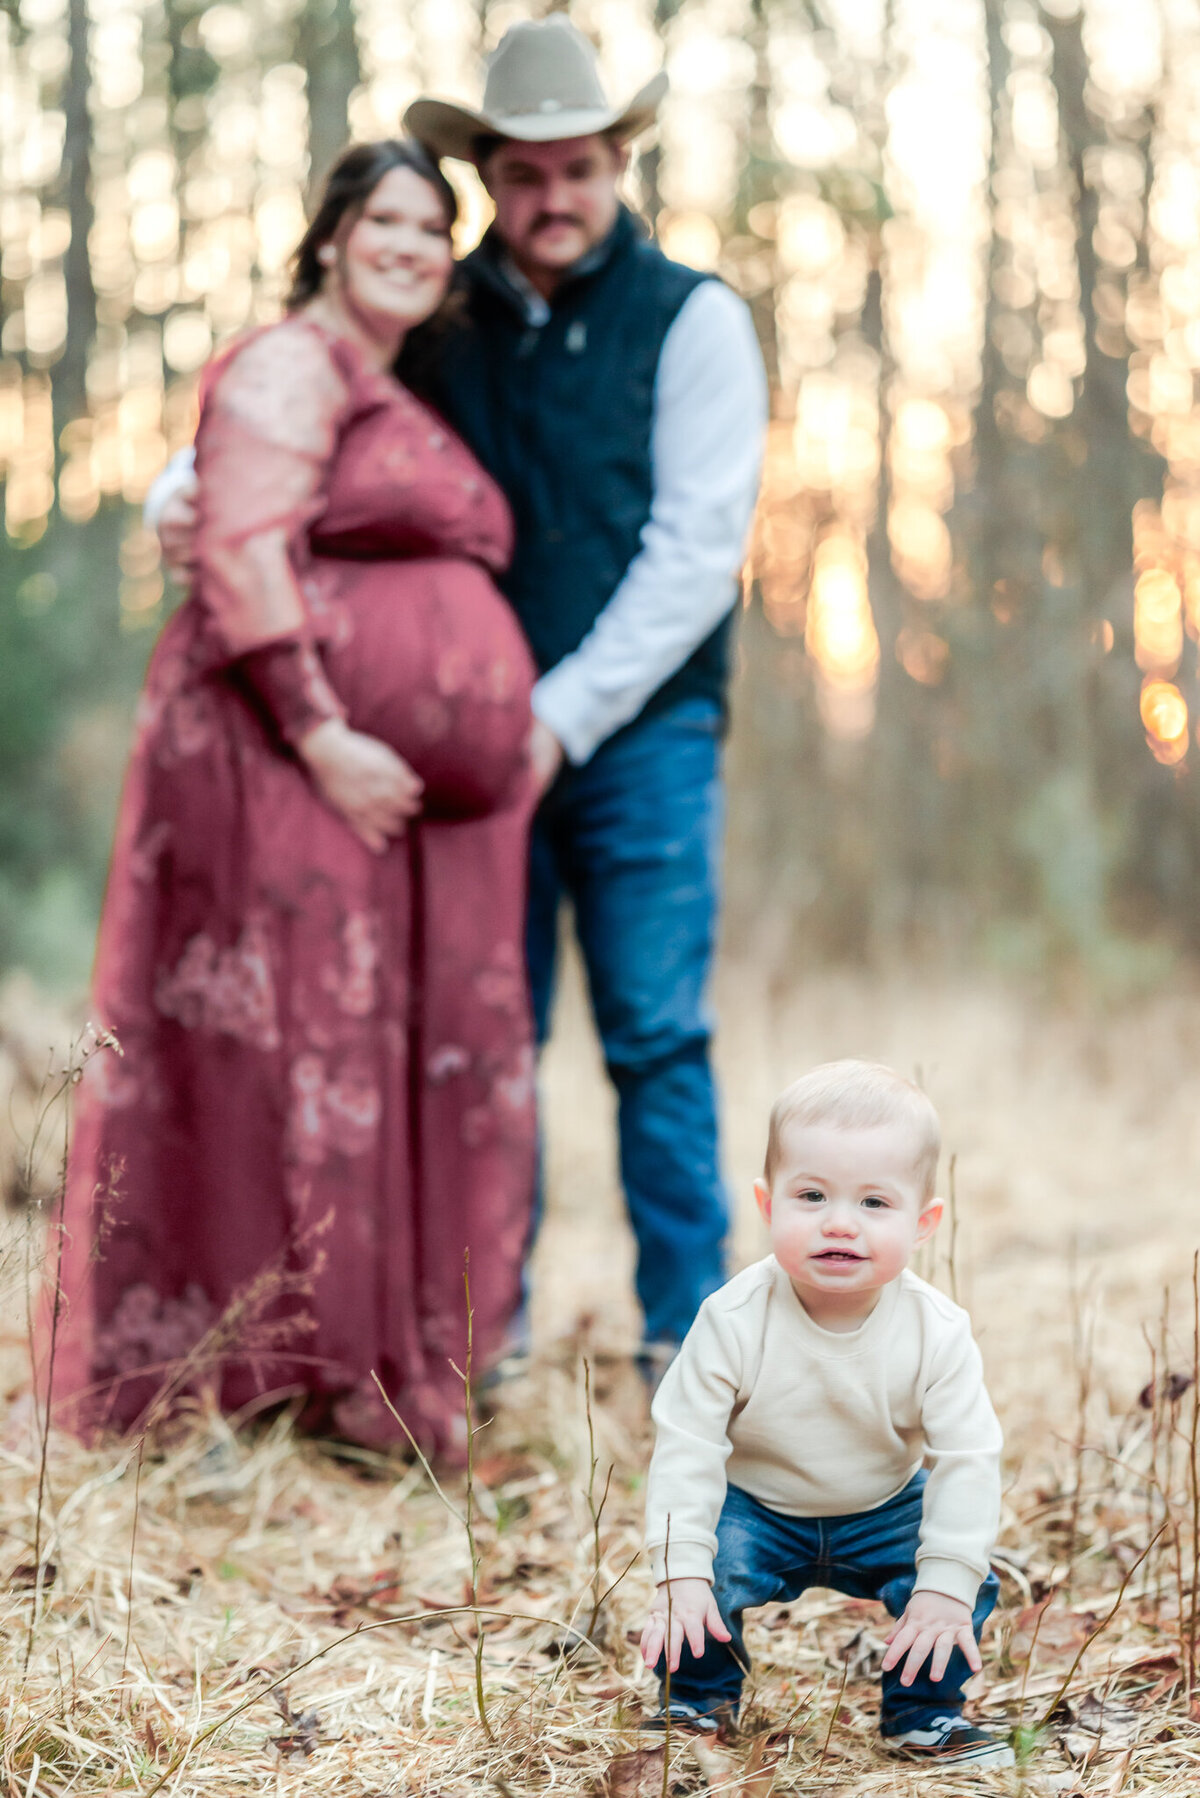 A toddler squats in the tall grass in front of his parents. The parents put their arms around each other and on mom's pregnant belly.